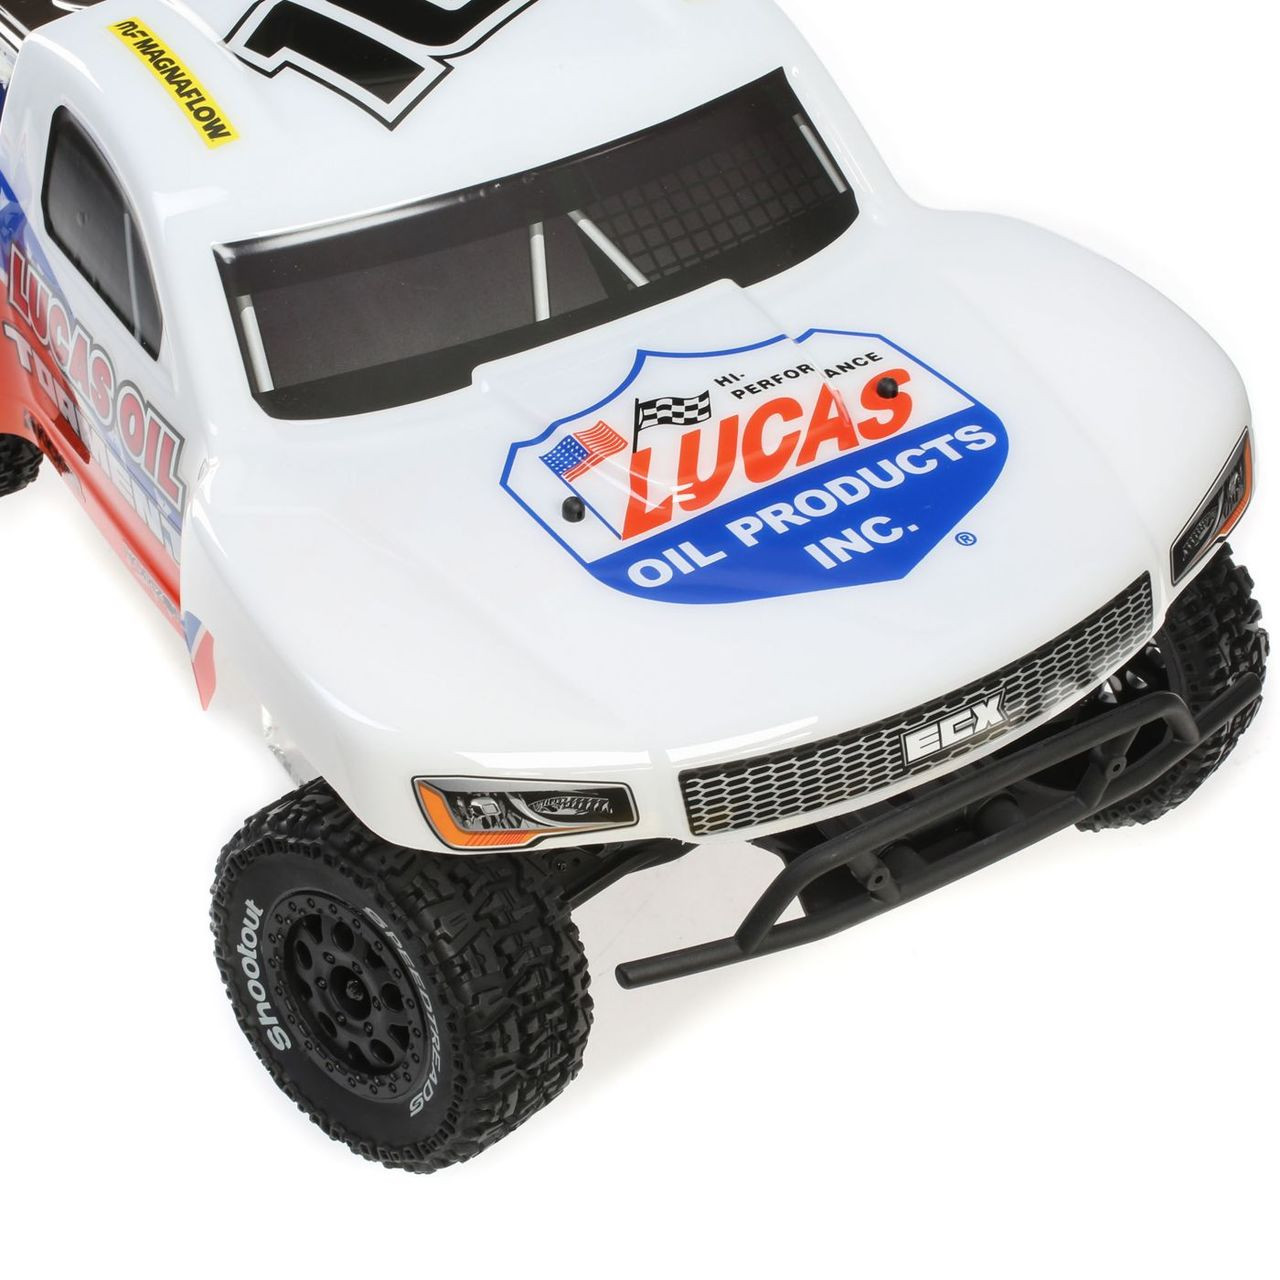 ECX 1/10 Torment 2WD SCT Brushed RTR, No Battery/Charger (Lucas Oil)